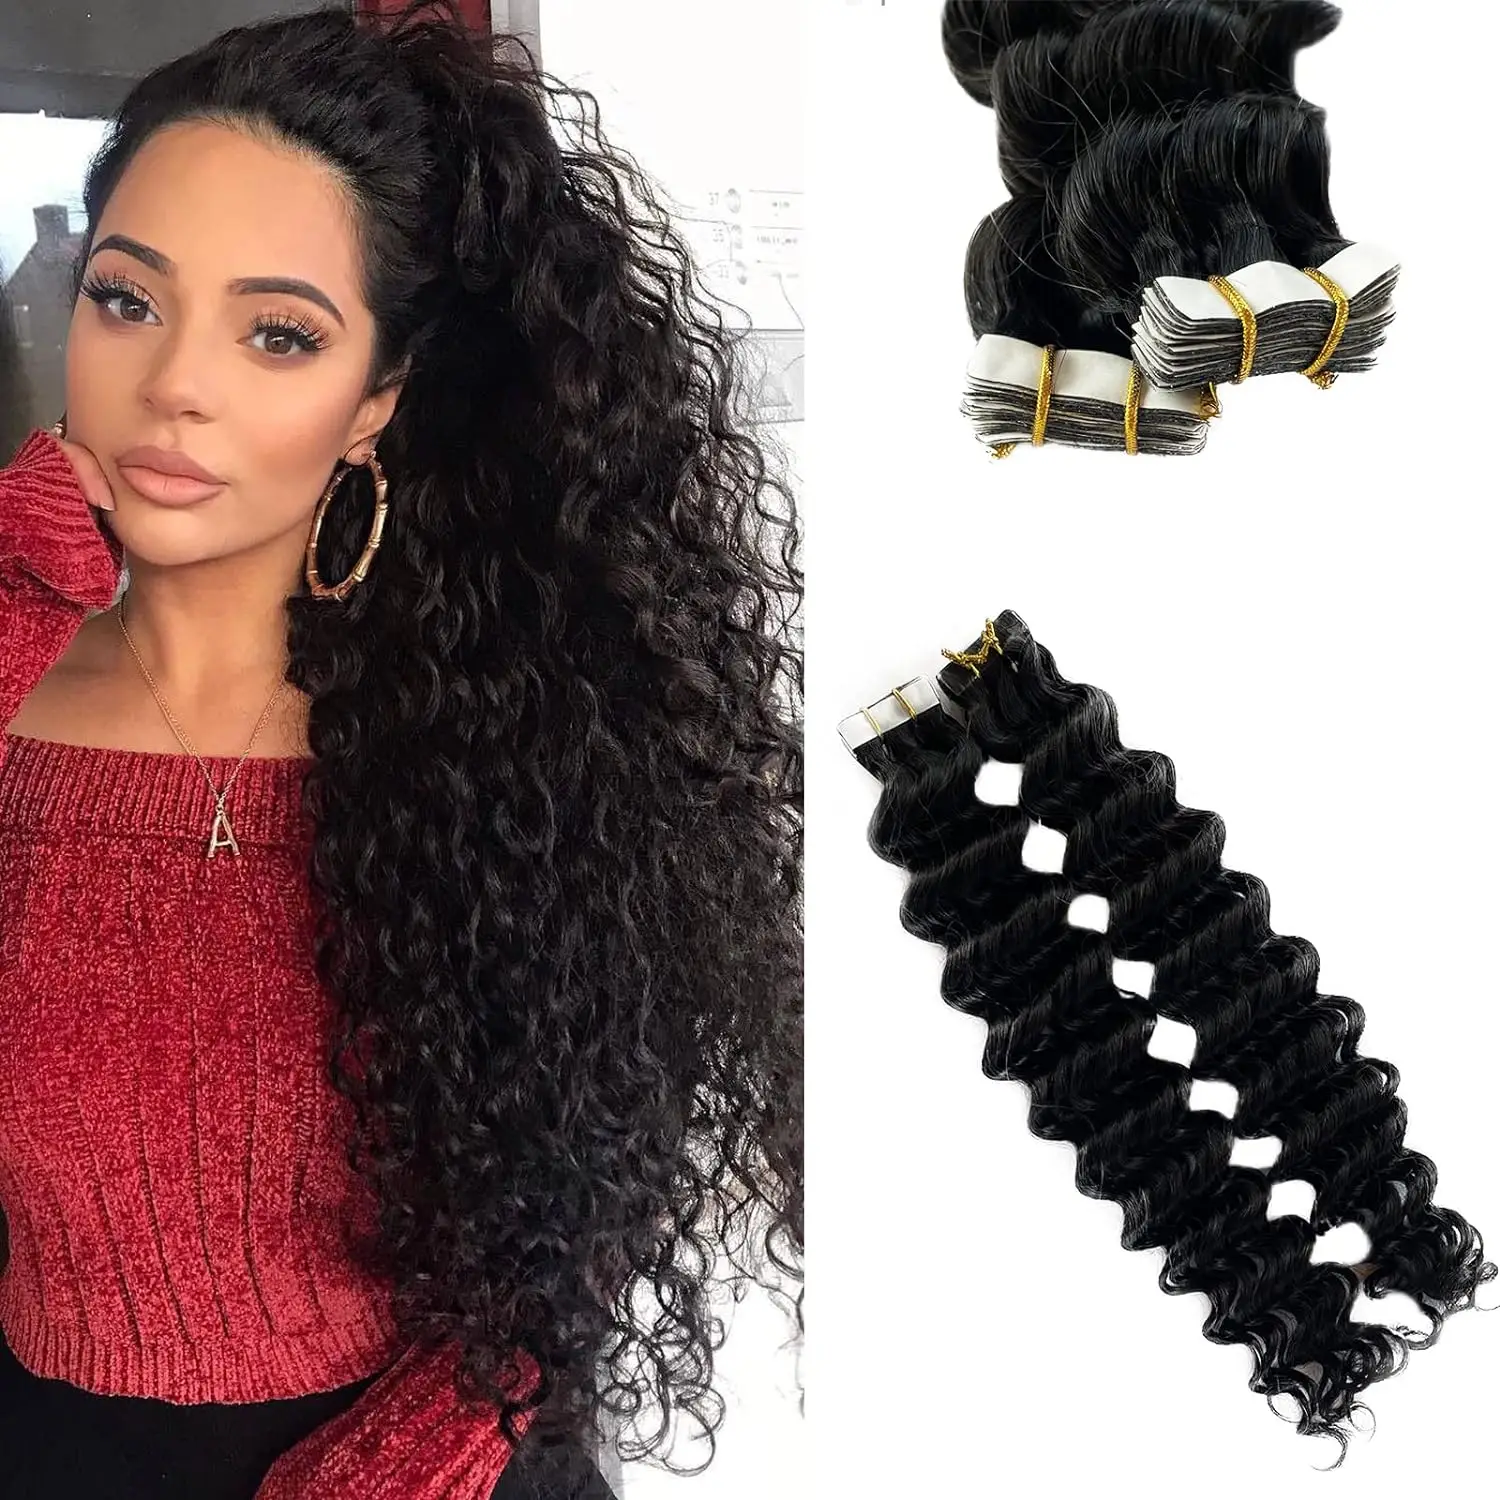 

Deep wave Tape In Hair Extensions 50g Human Hair 100% Remy Seamless Skin Weft Invisible Double Sided Tape Ins Hair For Women